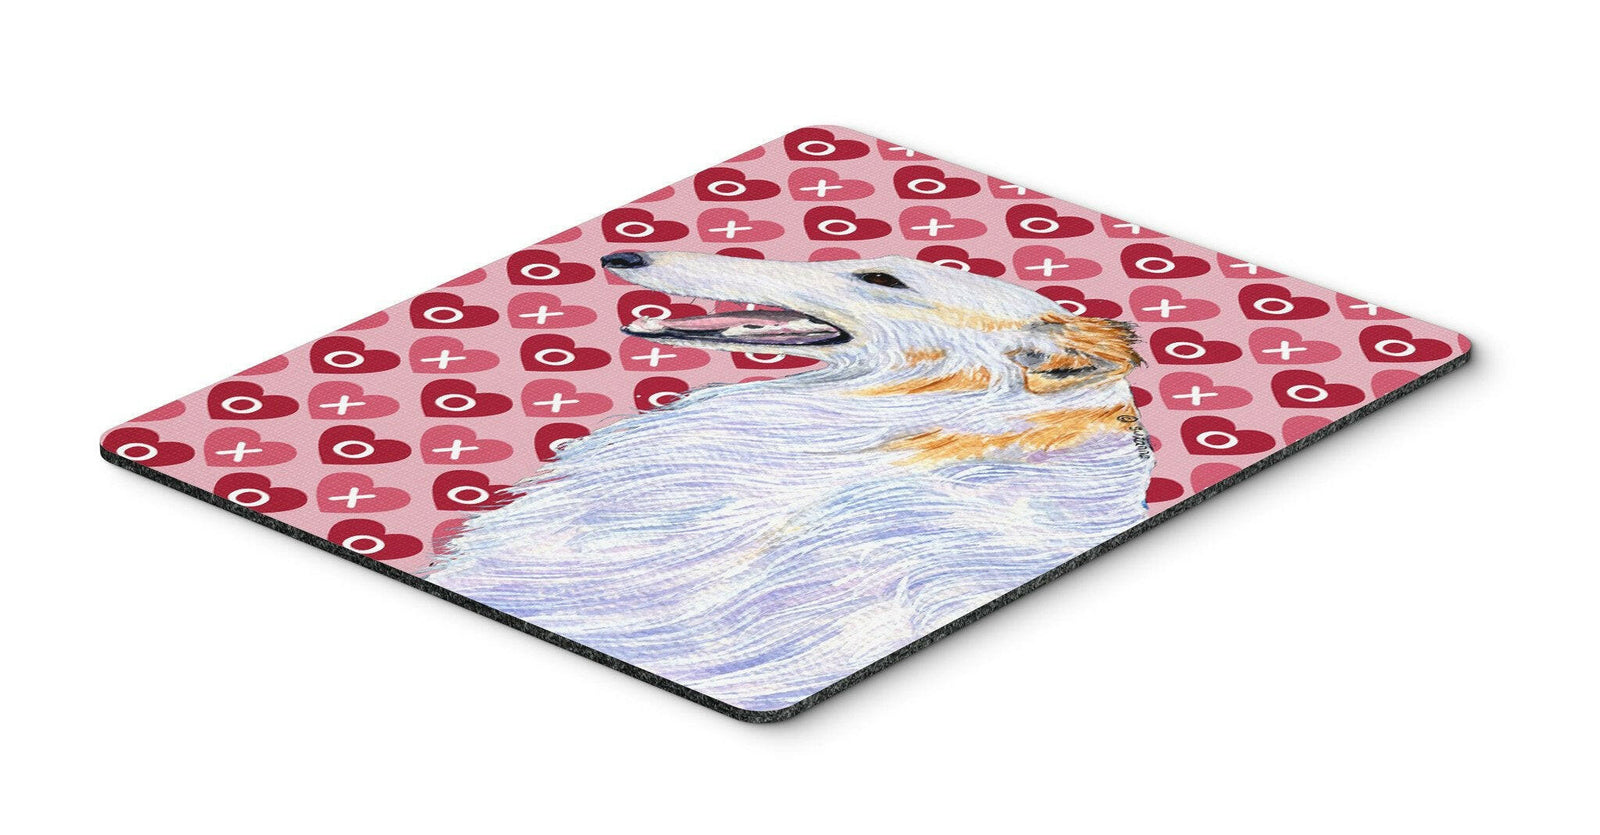 Borzoi Hearts Love and Valentine's Day Portrait Mouse Pad, Hot Pad or Trivet by Caroline's Treasures